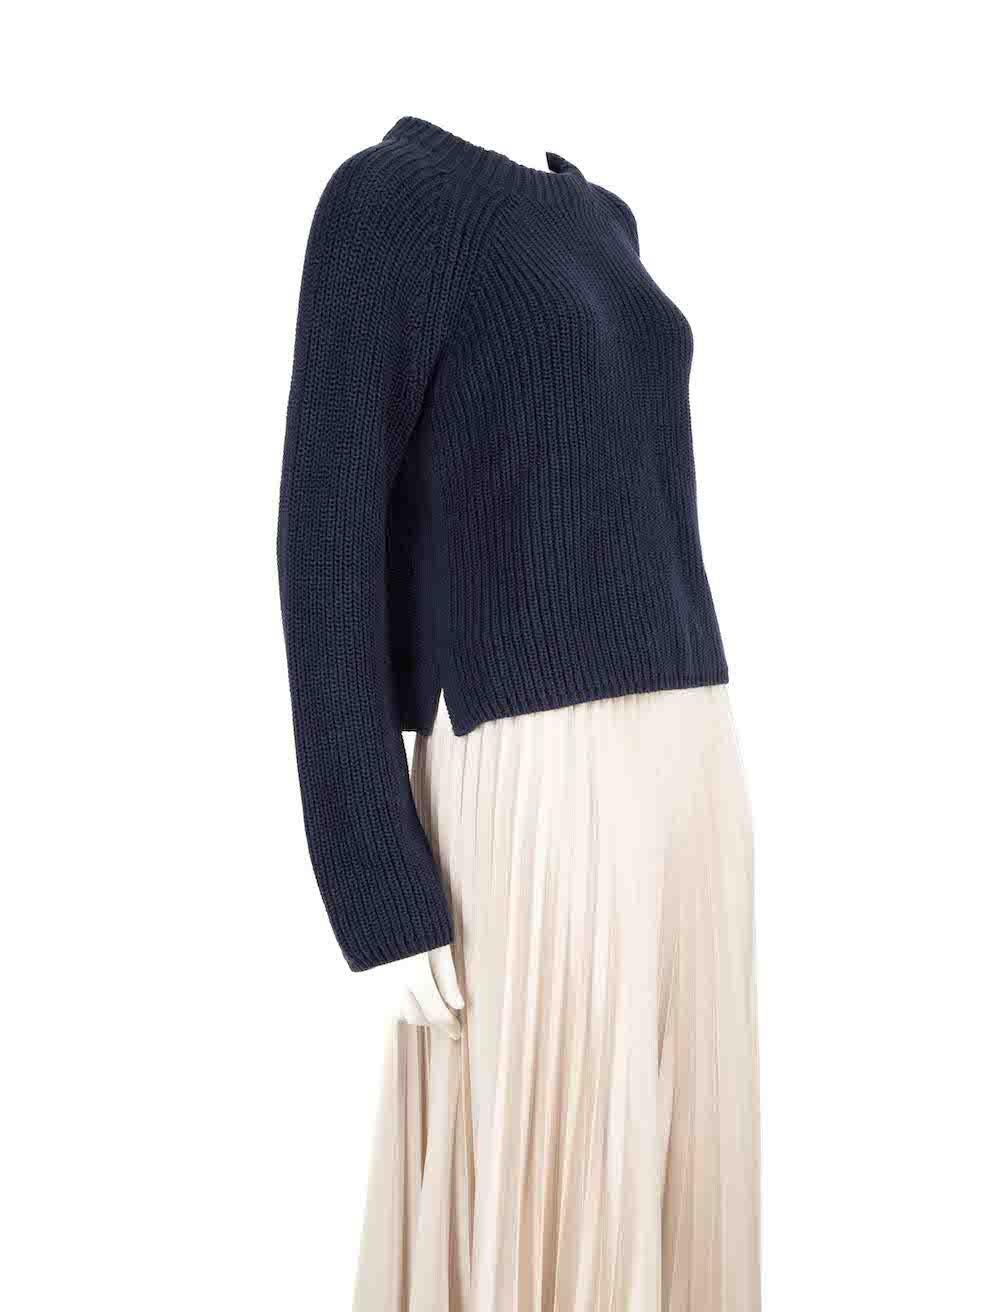 CONDITION is Very good. Hardly any visible wear to jumper is evident on this used ME+EM designer resale item.
 
 Details
 Navy
 Cotton
 Knit jumper
 Long sleeves
 Round neck
 
 
 Made in China
 
 Composition
 100% Cotton
 
 Care instructions: